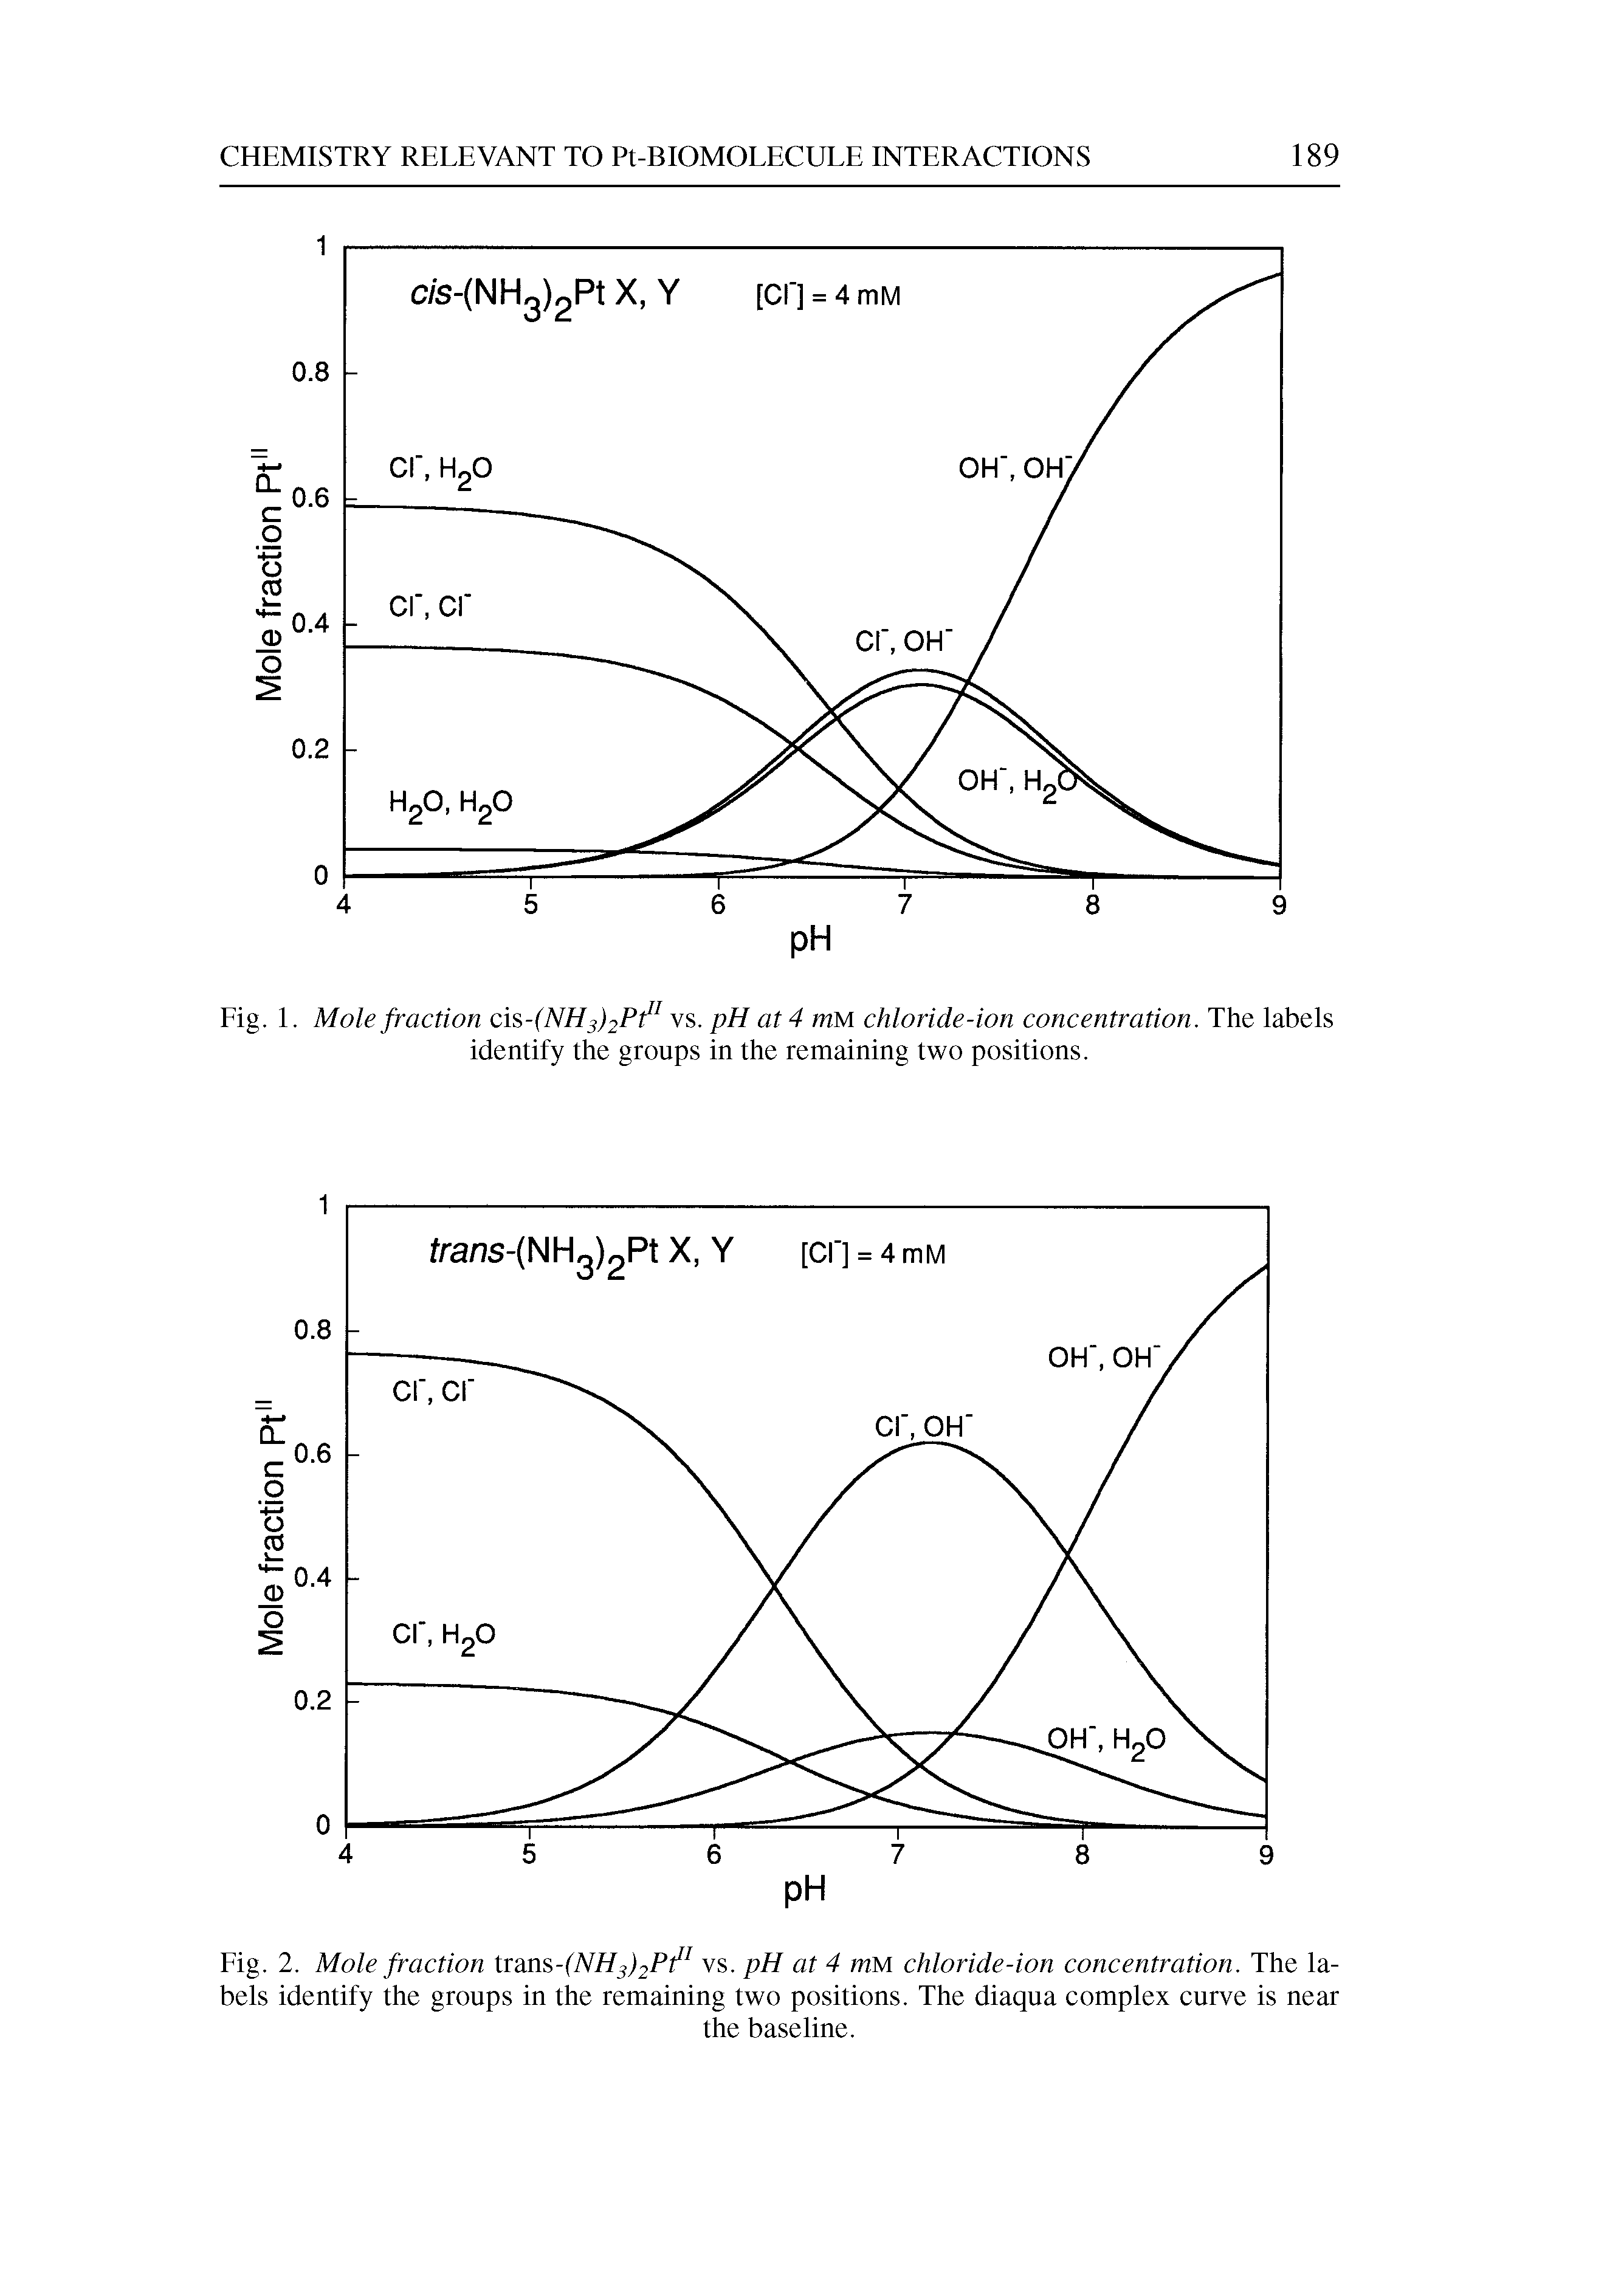 Fig. 2. Mole fraction trans-(NH3)2Pt11 vs. pH at 4 mm chloride-ion concentration. The labels identify the groups in the remaining two positions. The diaqua complex curve is near...